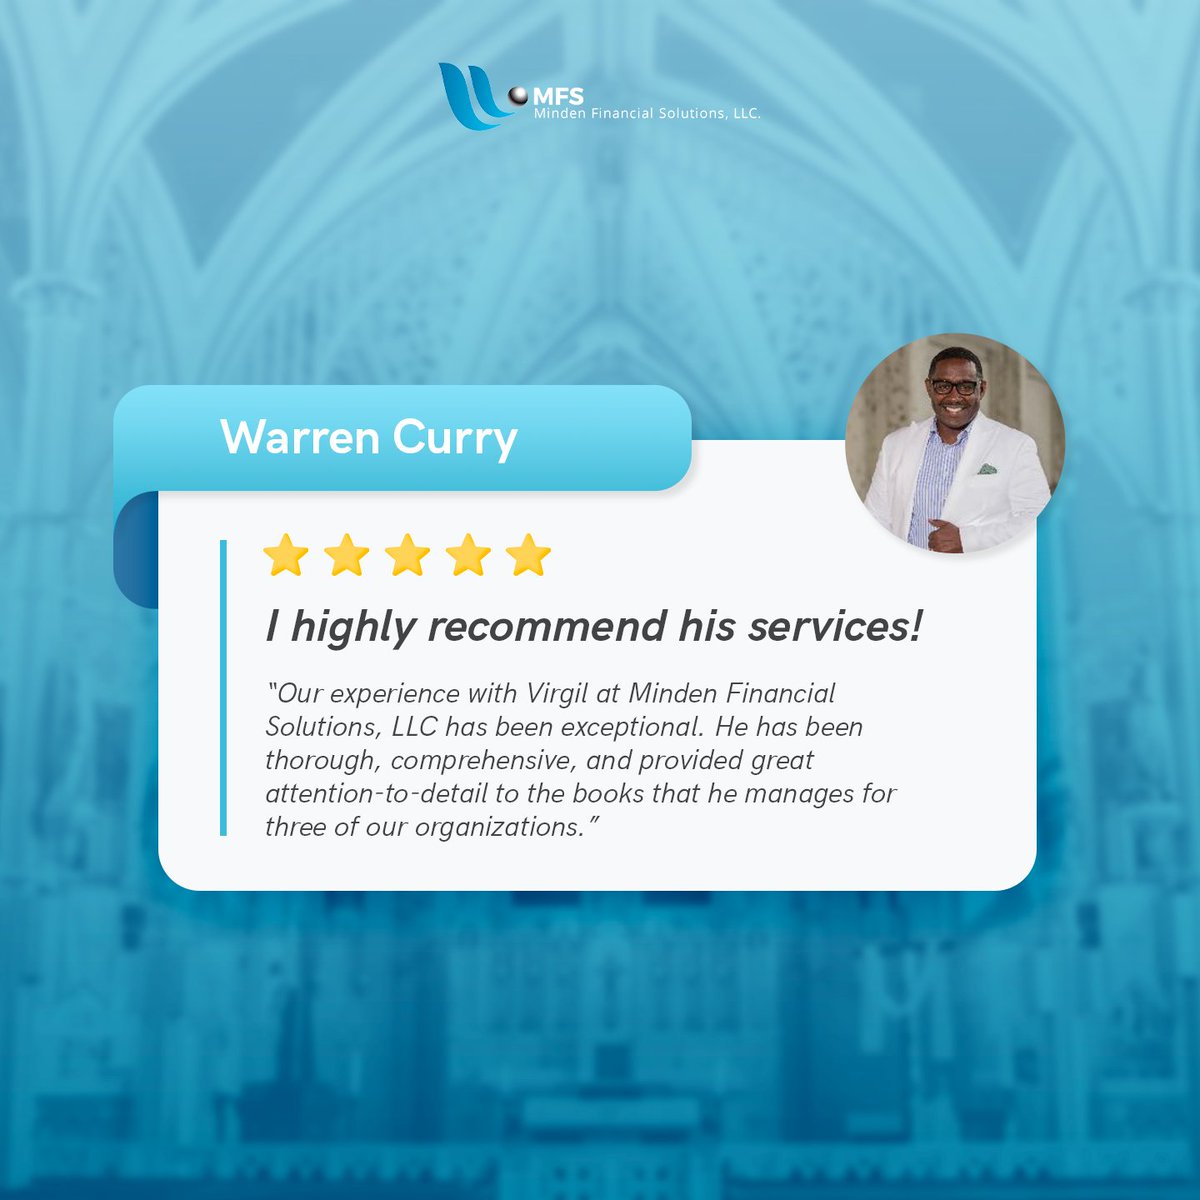 It's always a joy to read a 5-star review from a satisfied client. ⭐ Thank you for sharing your experience with us, Warren! ❤️
#nonprofitaccountant #nonprofitbranding #changemakers